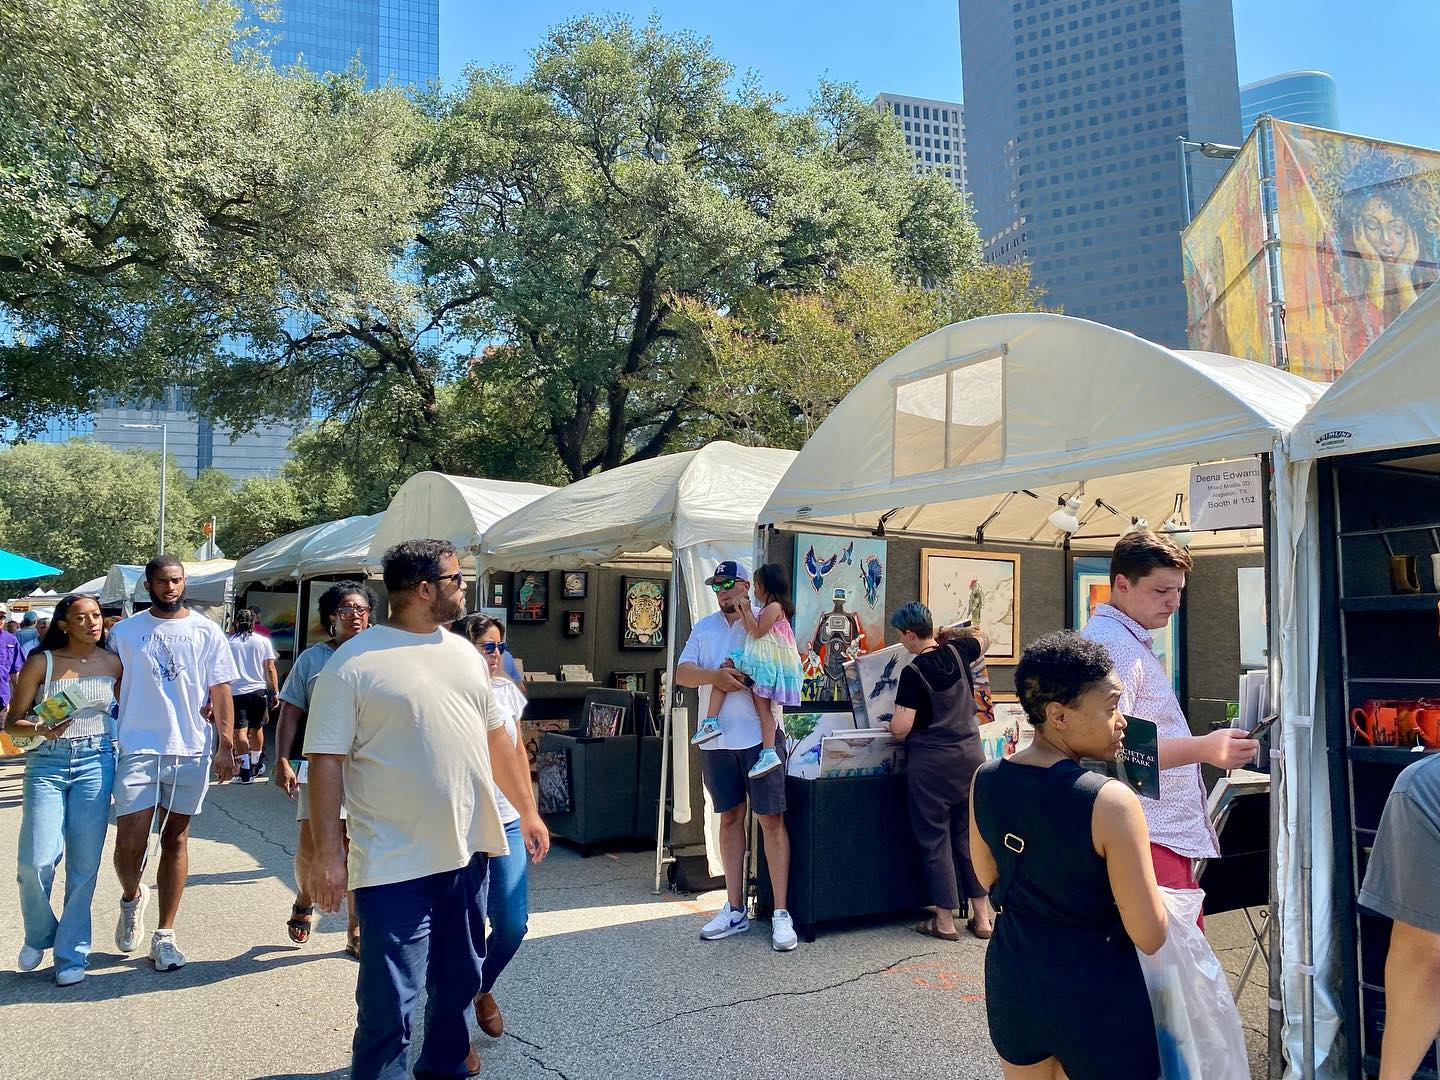 Call for Artists: Applications Open for Fall 2023 Bayou City Art Festival